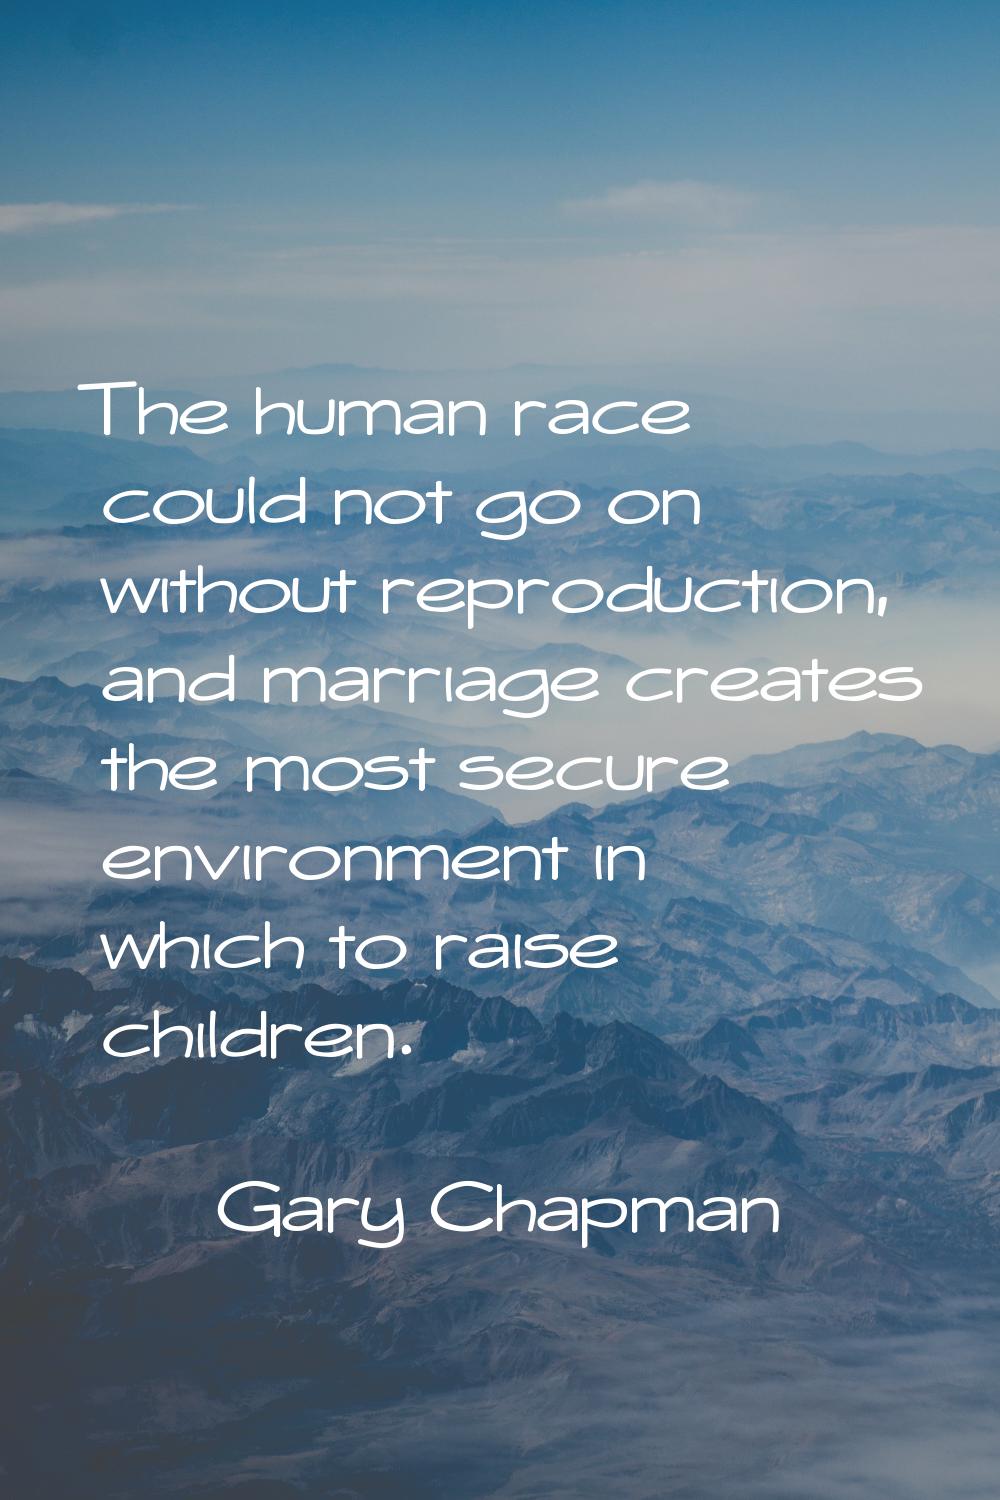 The human race could not go on without reproduction, and marriage creates the most secure environme